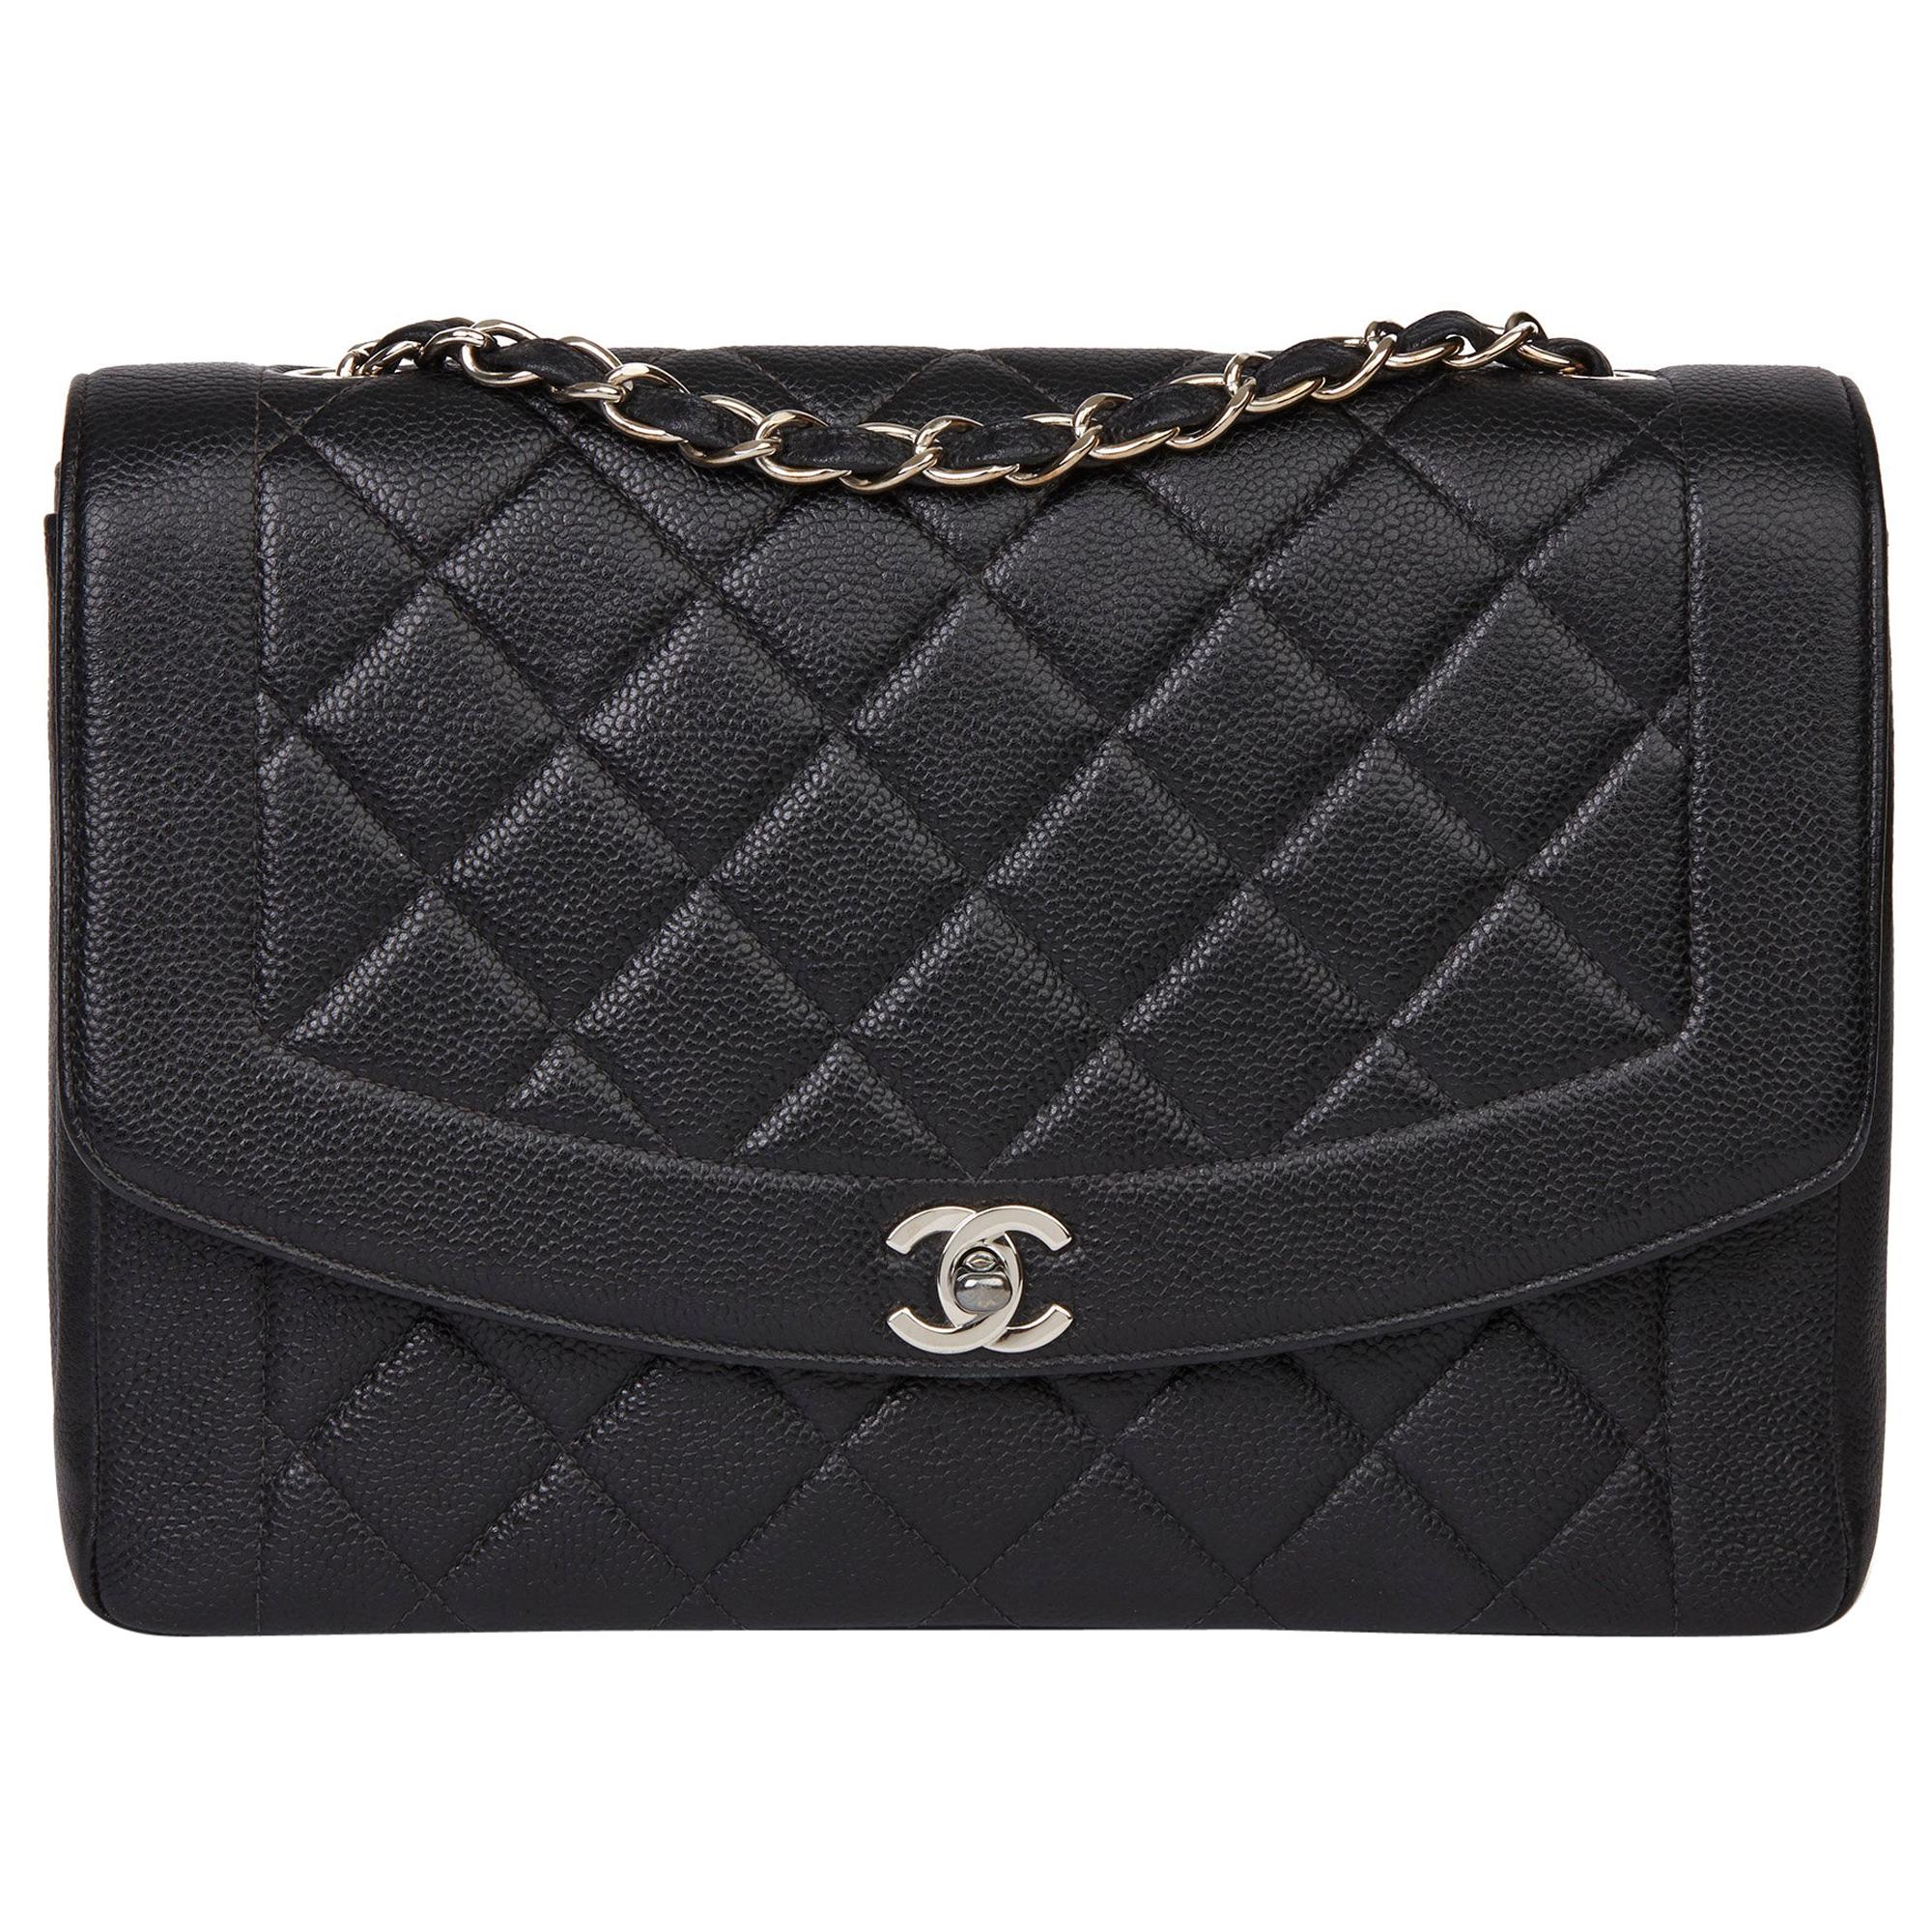 1996 Chanel Black Quilted Caviar Leather Vintage Large Diana Classic Single Flap